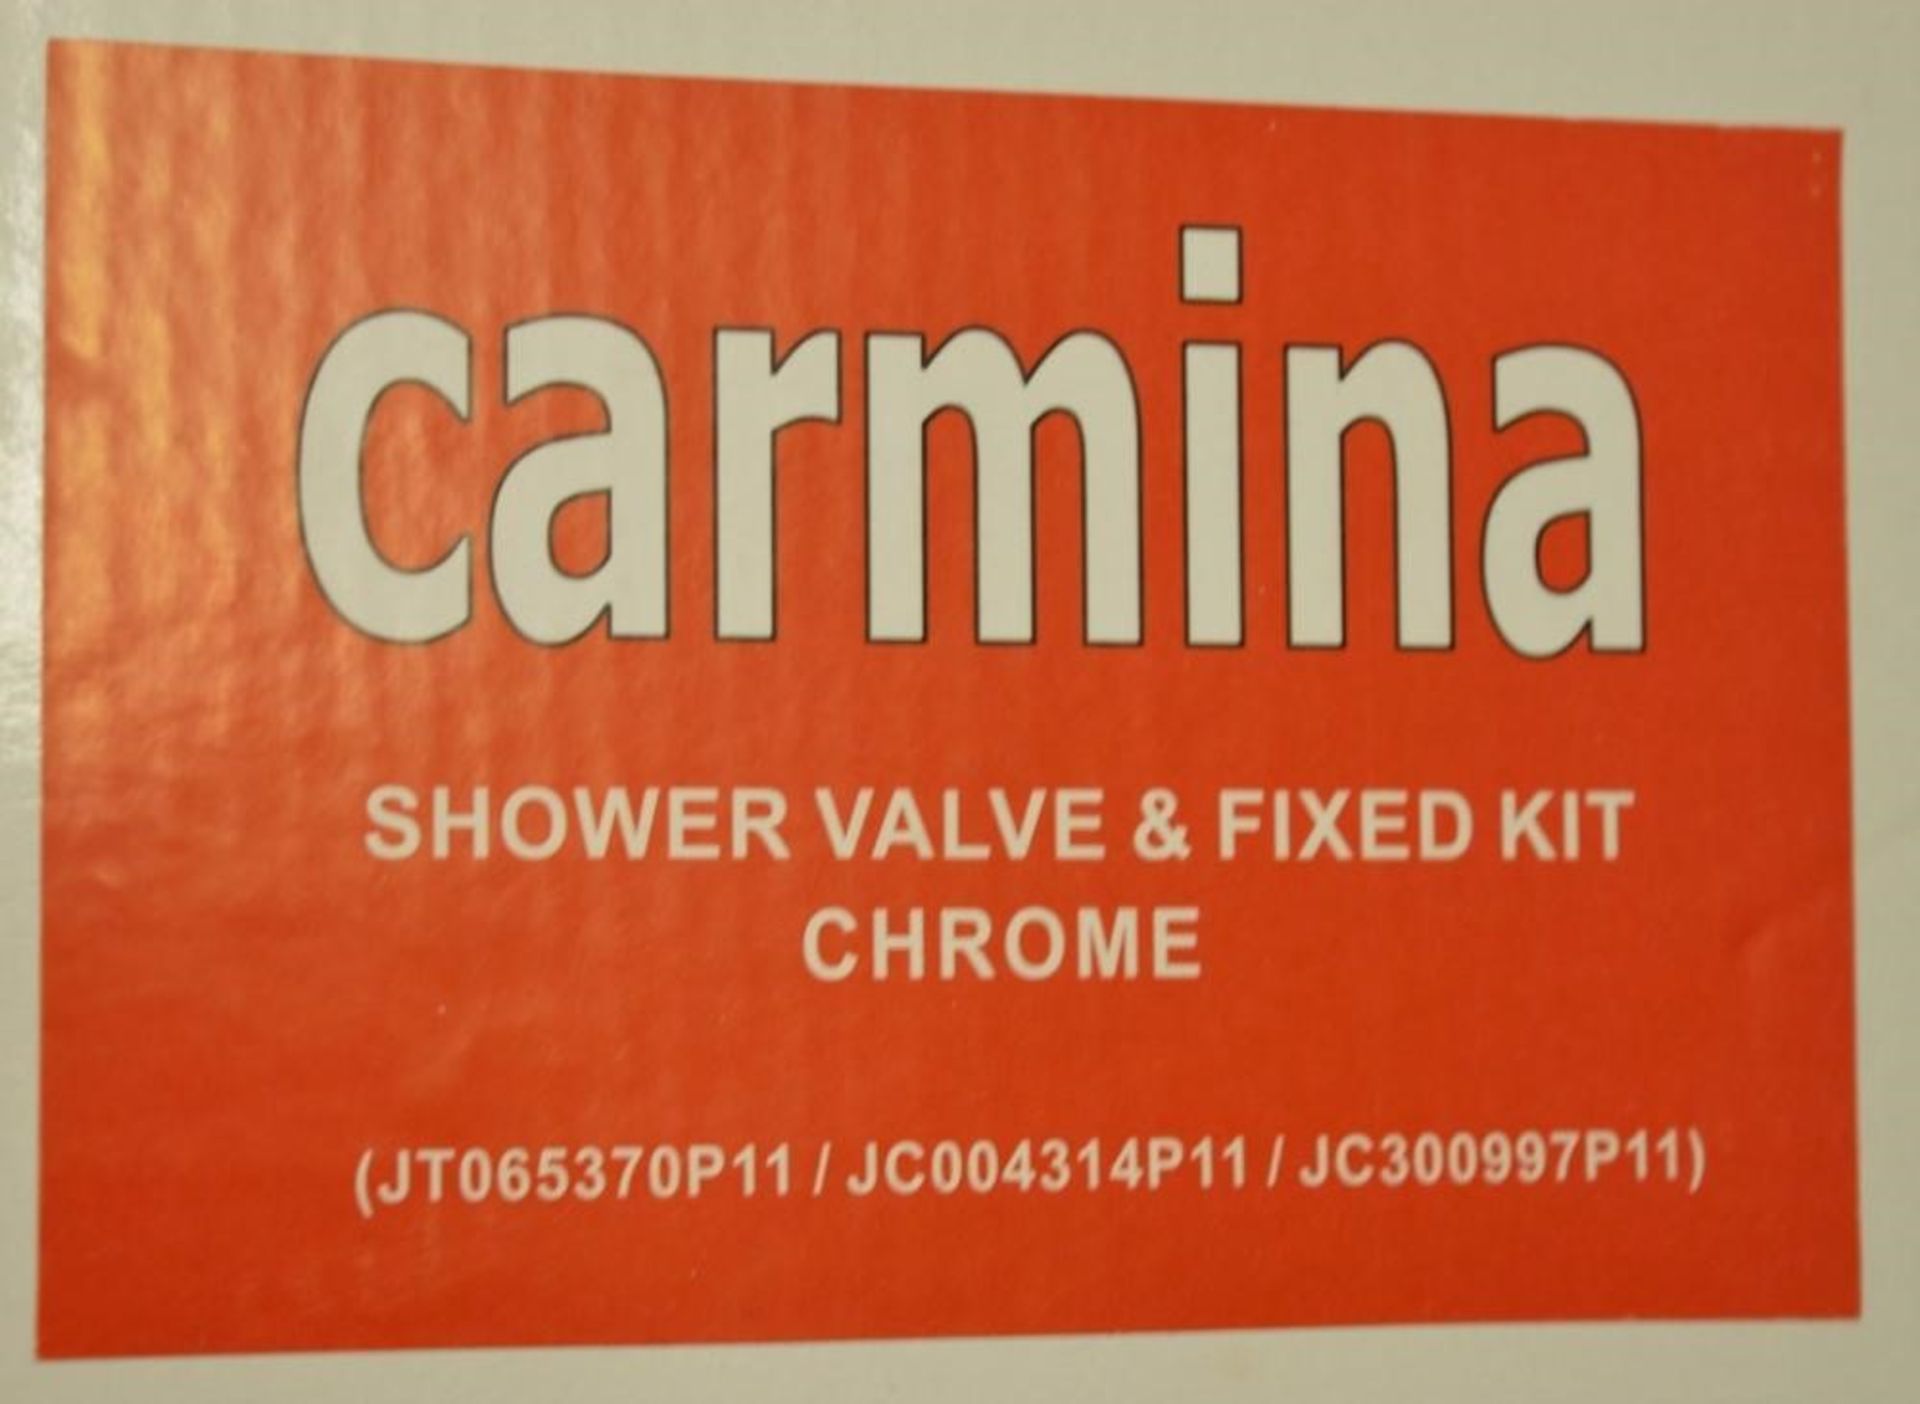 5 x Carmina Shower Valve Kit - Contains Chrome Shower Head, Fixed Arm and Manual Control - Image 3 of 13